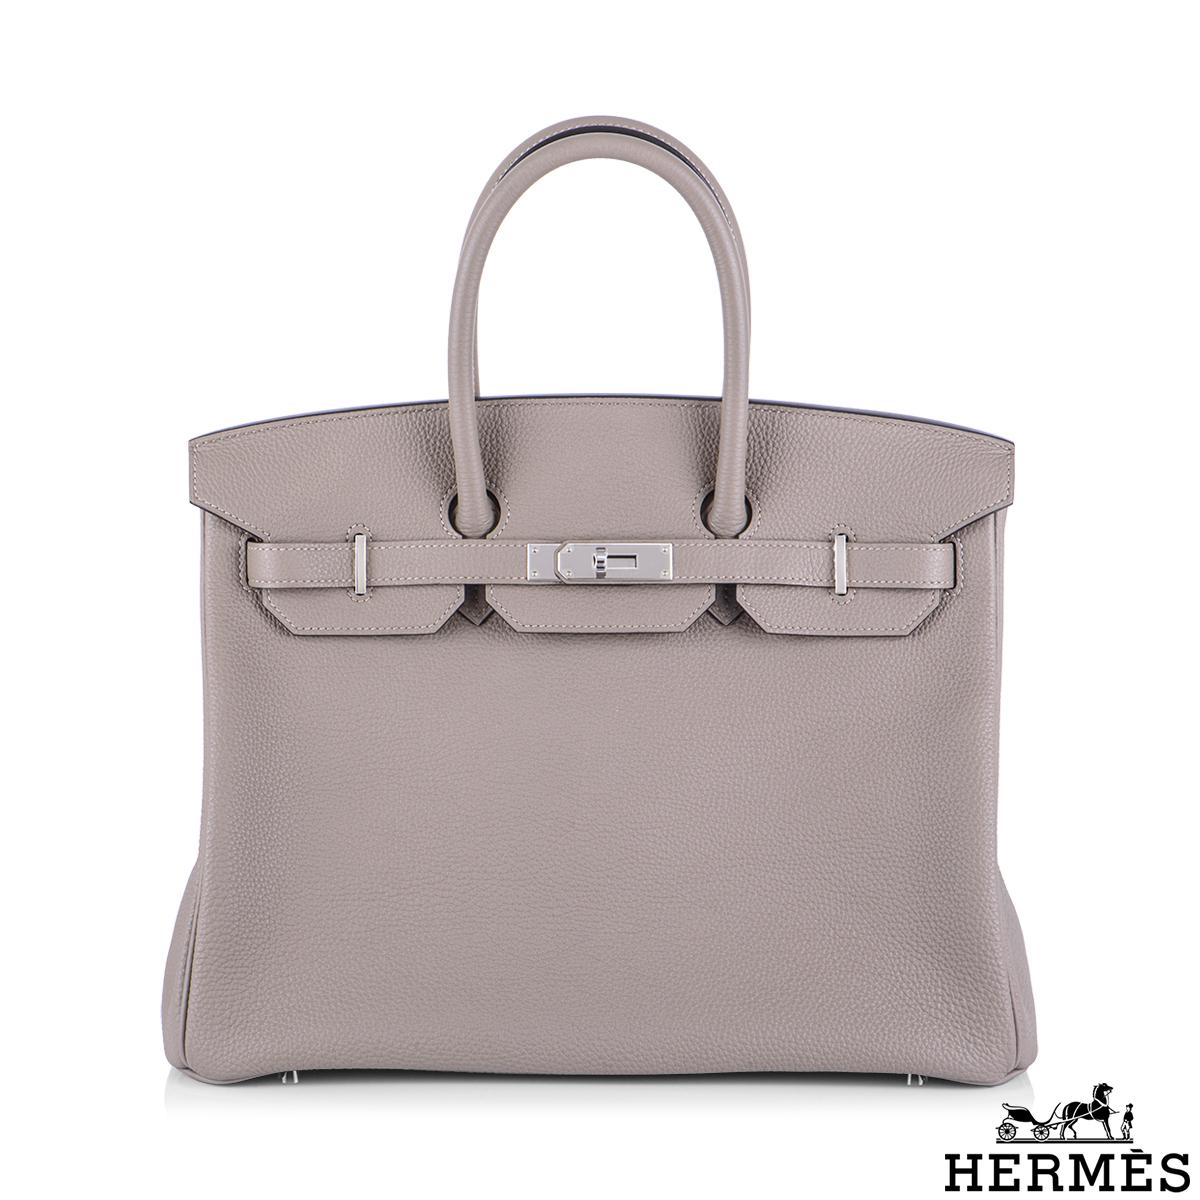 An exquisite and chic Hermès 35 cm Birkin bag. The exterior of this Birkin features togo leather in Gris Asphalt and is detailed with palladium hardware. Hermès Gris Asphalt is an incredibly elegant and versatile colour, it is one of the rare